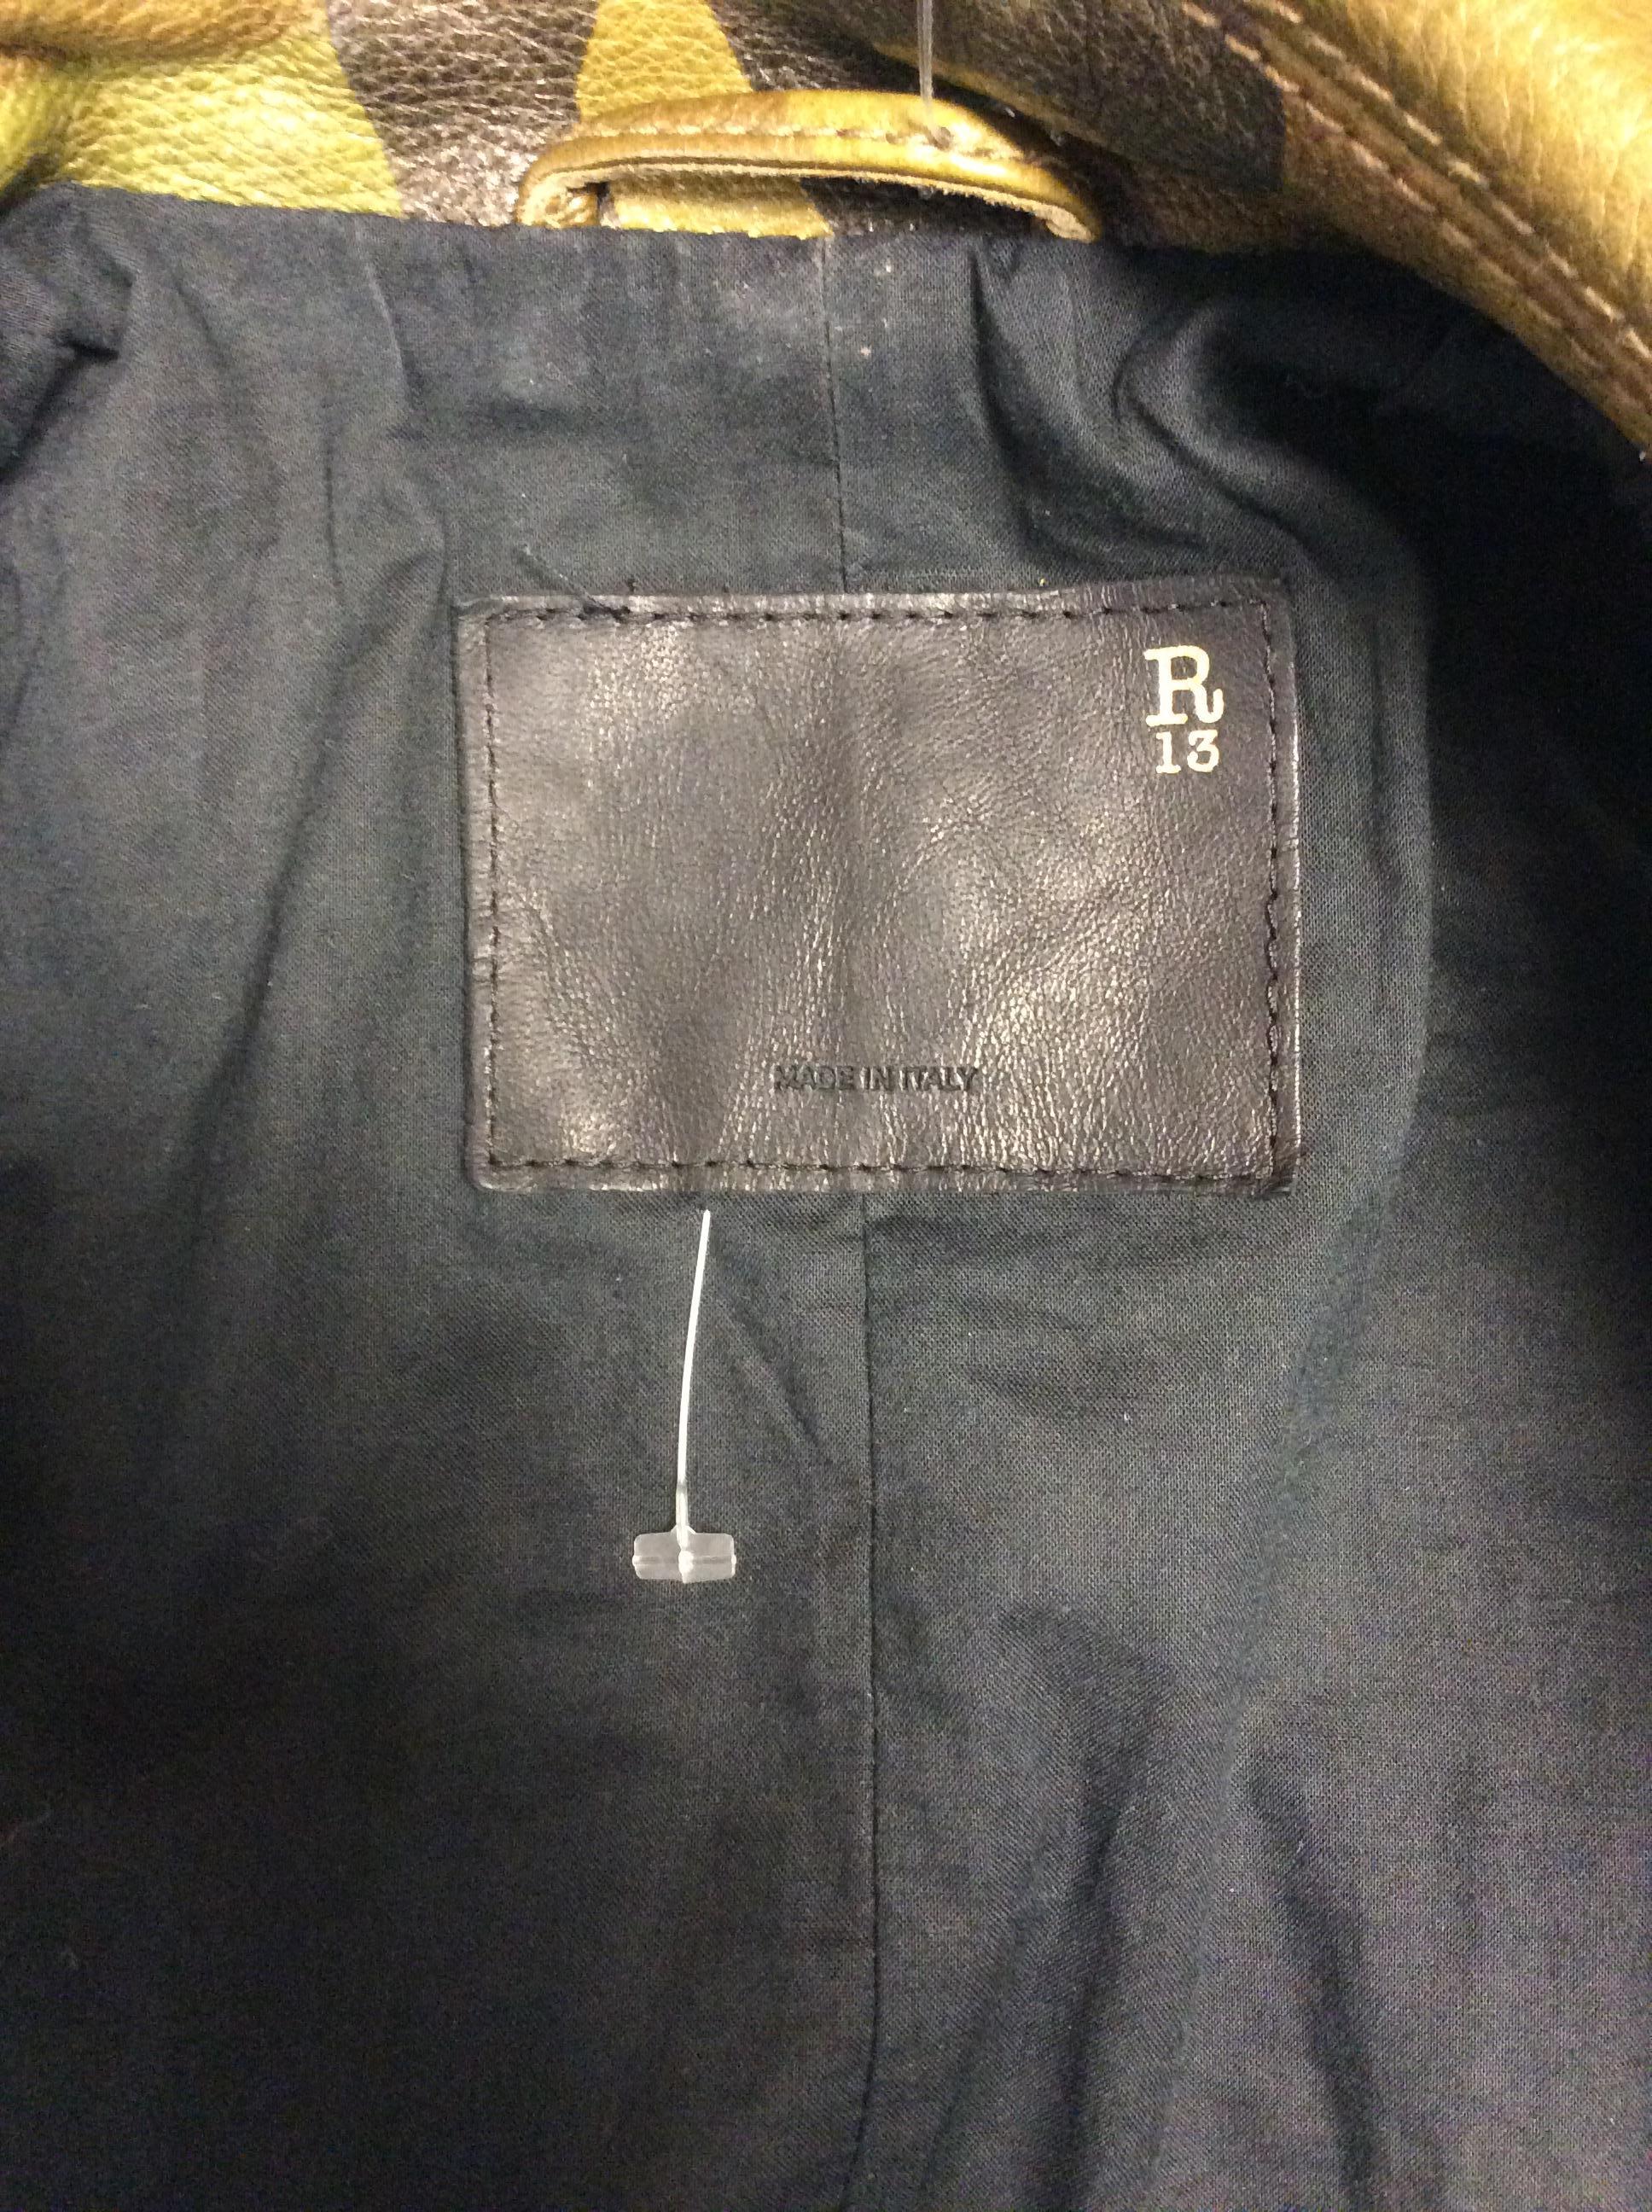 R13 Camouflage Leather Jacket In Good Condition For Sale In Narberth, PA